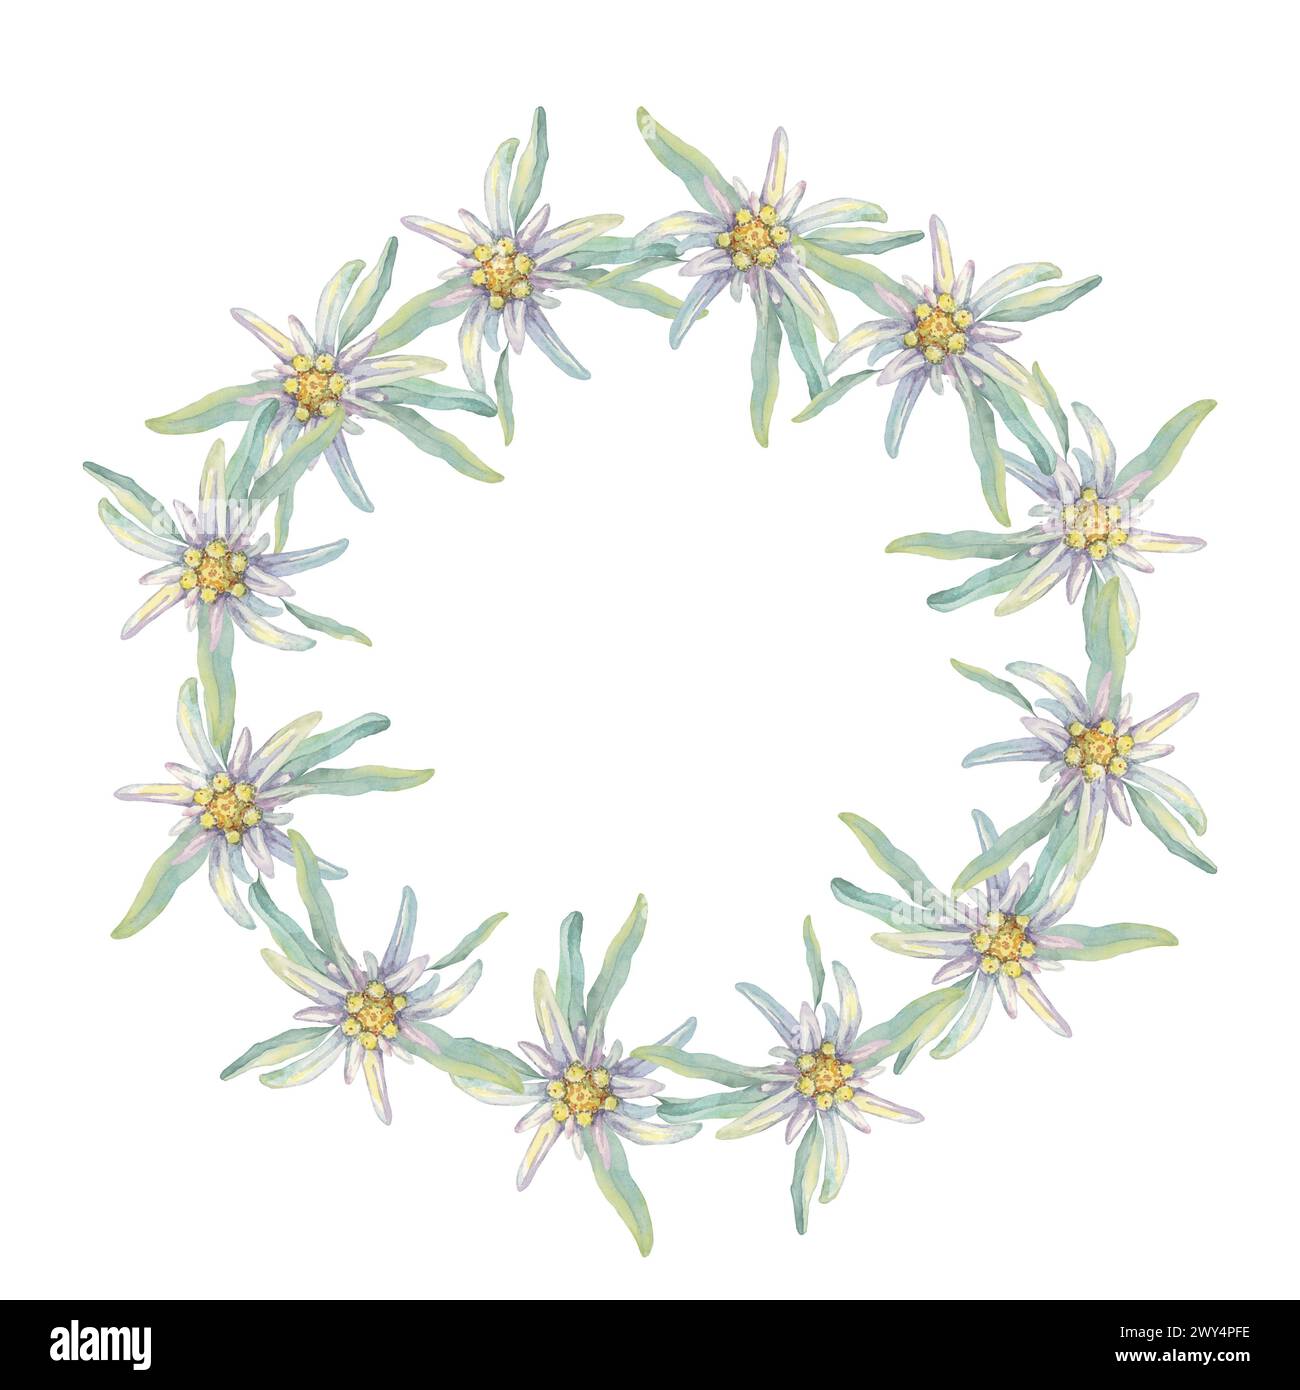 Round wreath of edelweiss flowers. Hand drawn watercolor clipart, minimalistic floral style in pastel colors. Design template for postcard, invitation, printing, weddings, isolated on white background Stock Photo